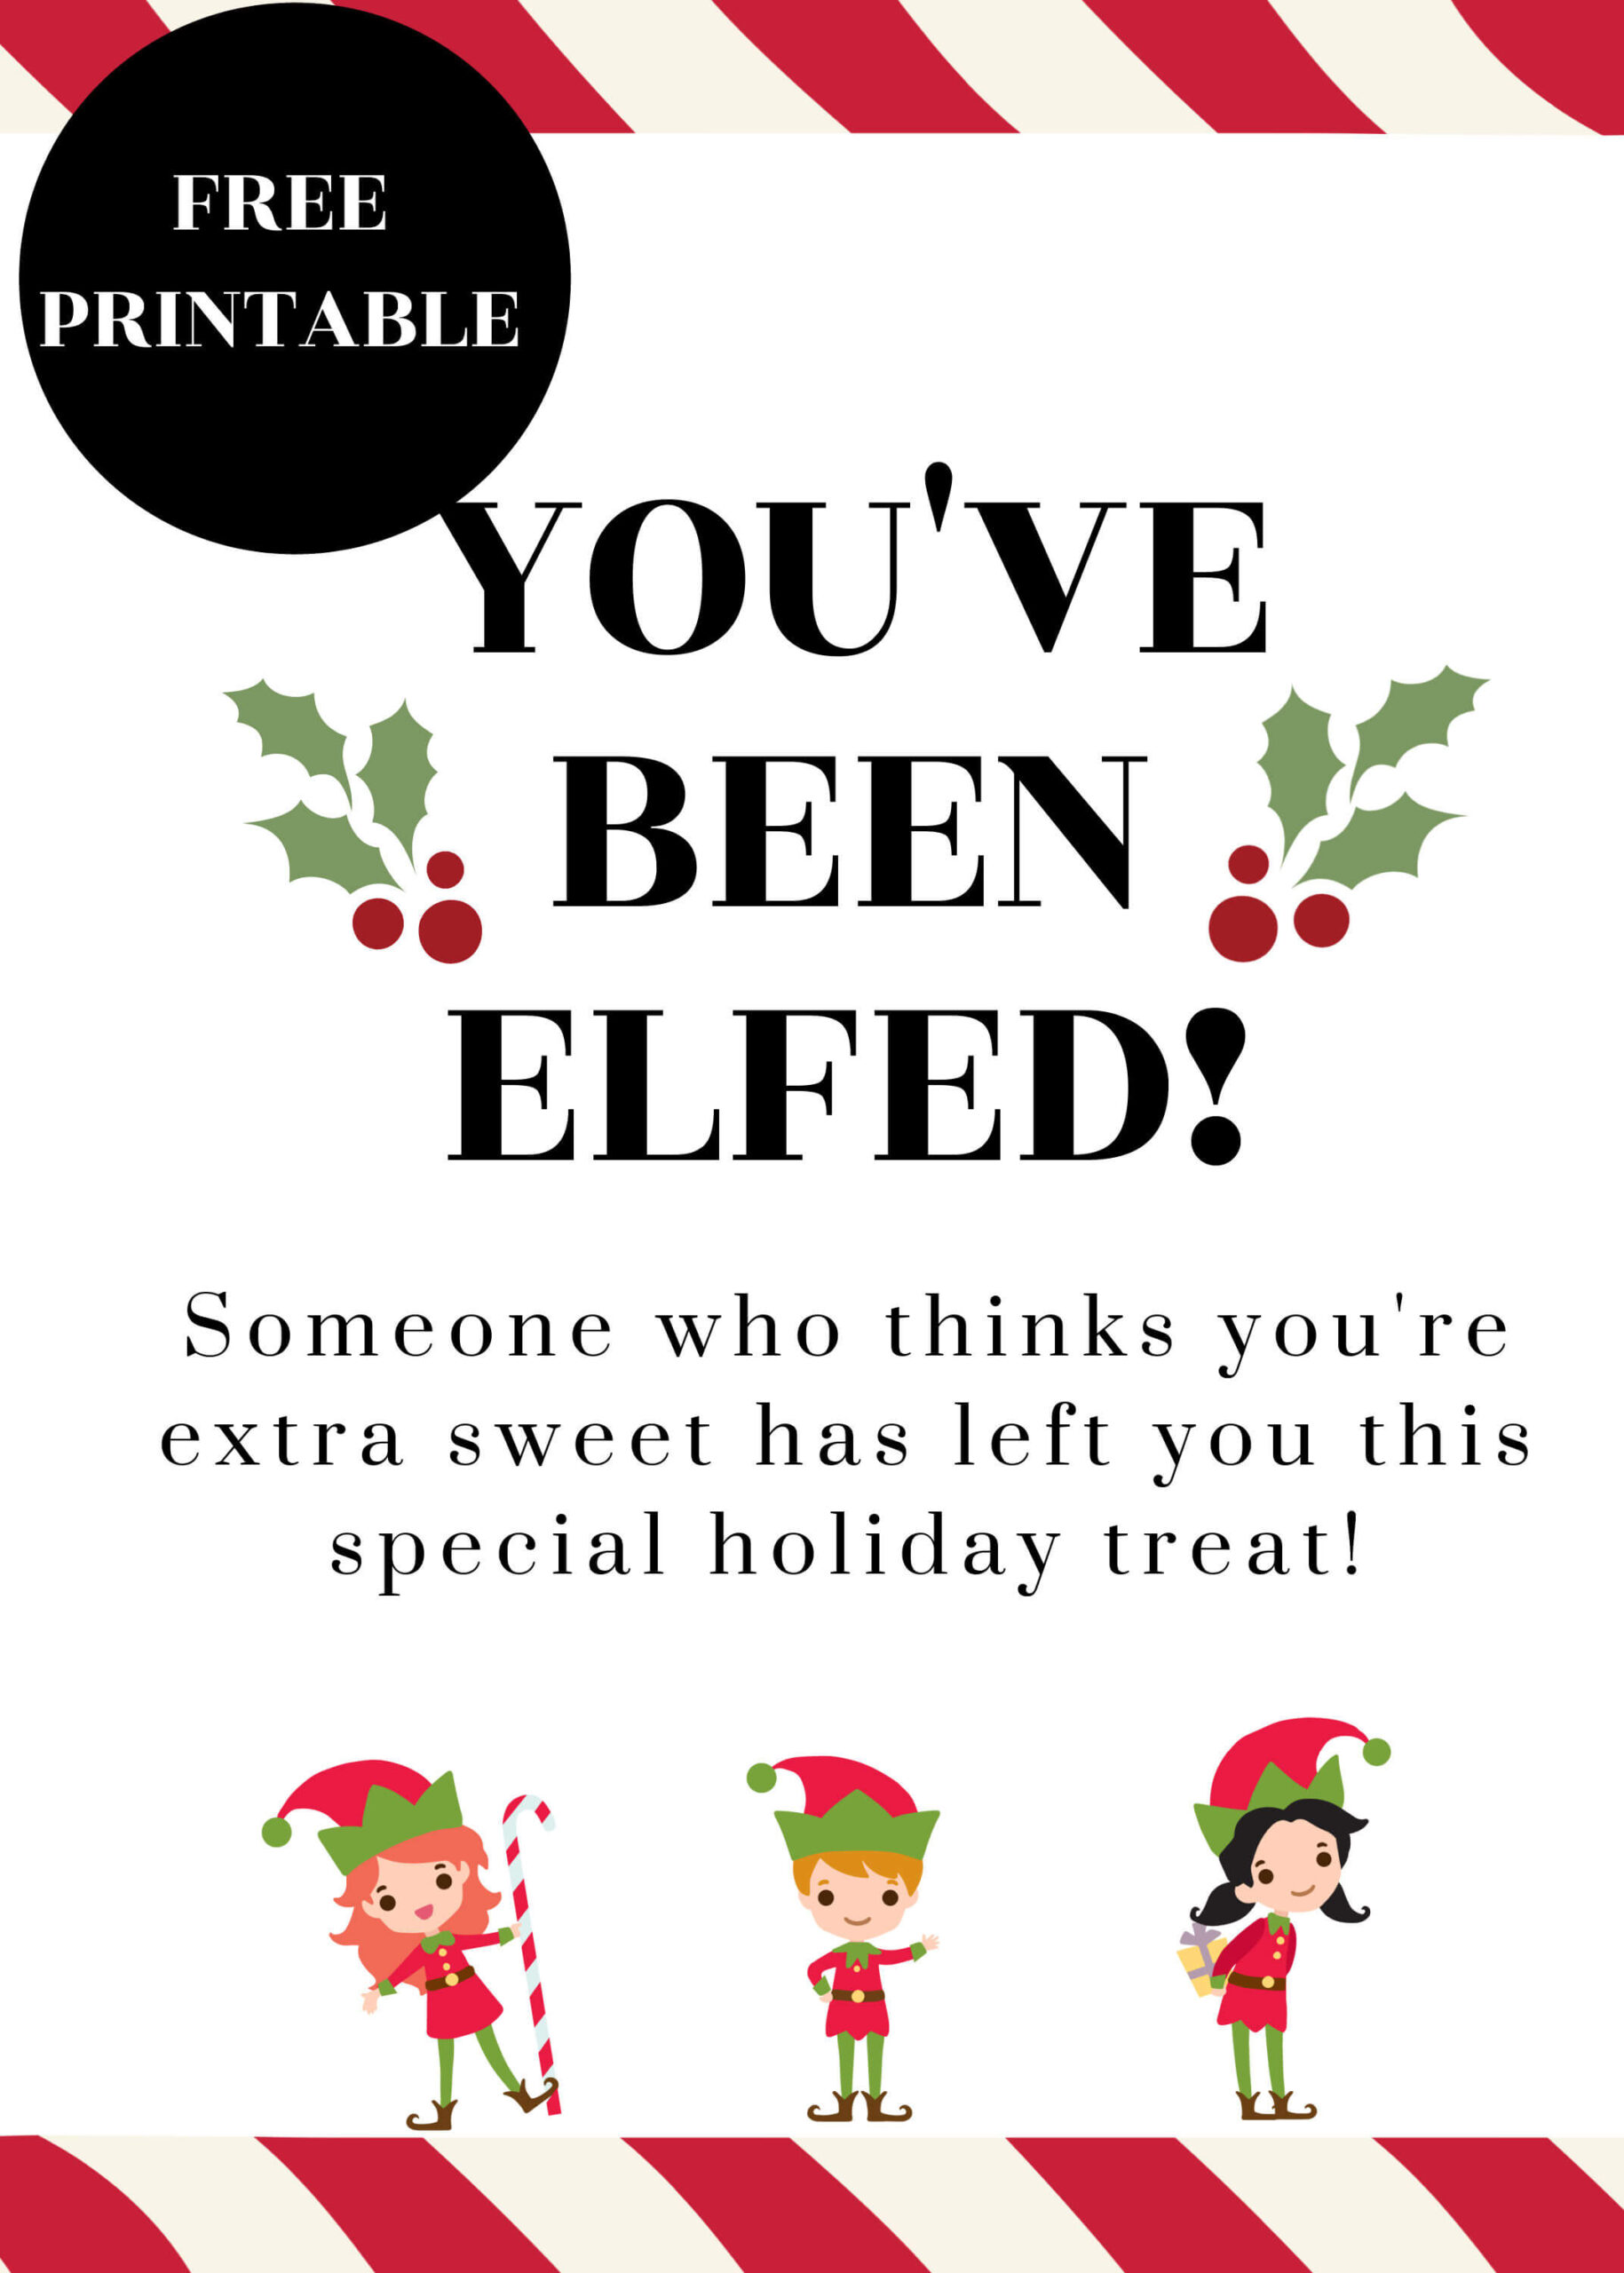 A cute graphic that reads "You've Been Elfed! Someone who thinks you're extra sweet has left you this special holiday treat."